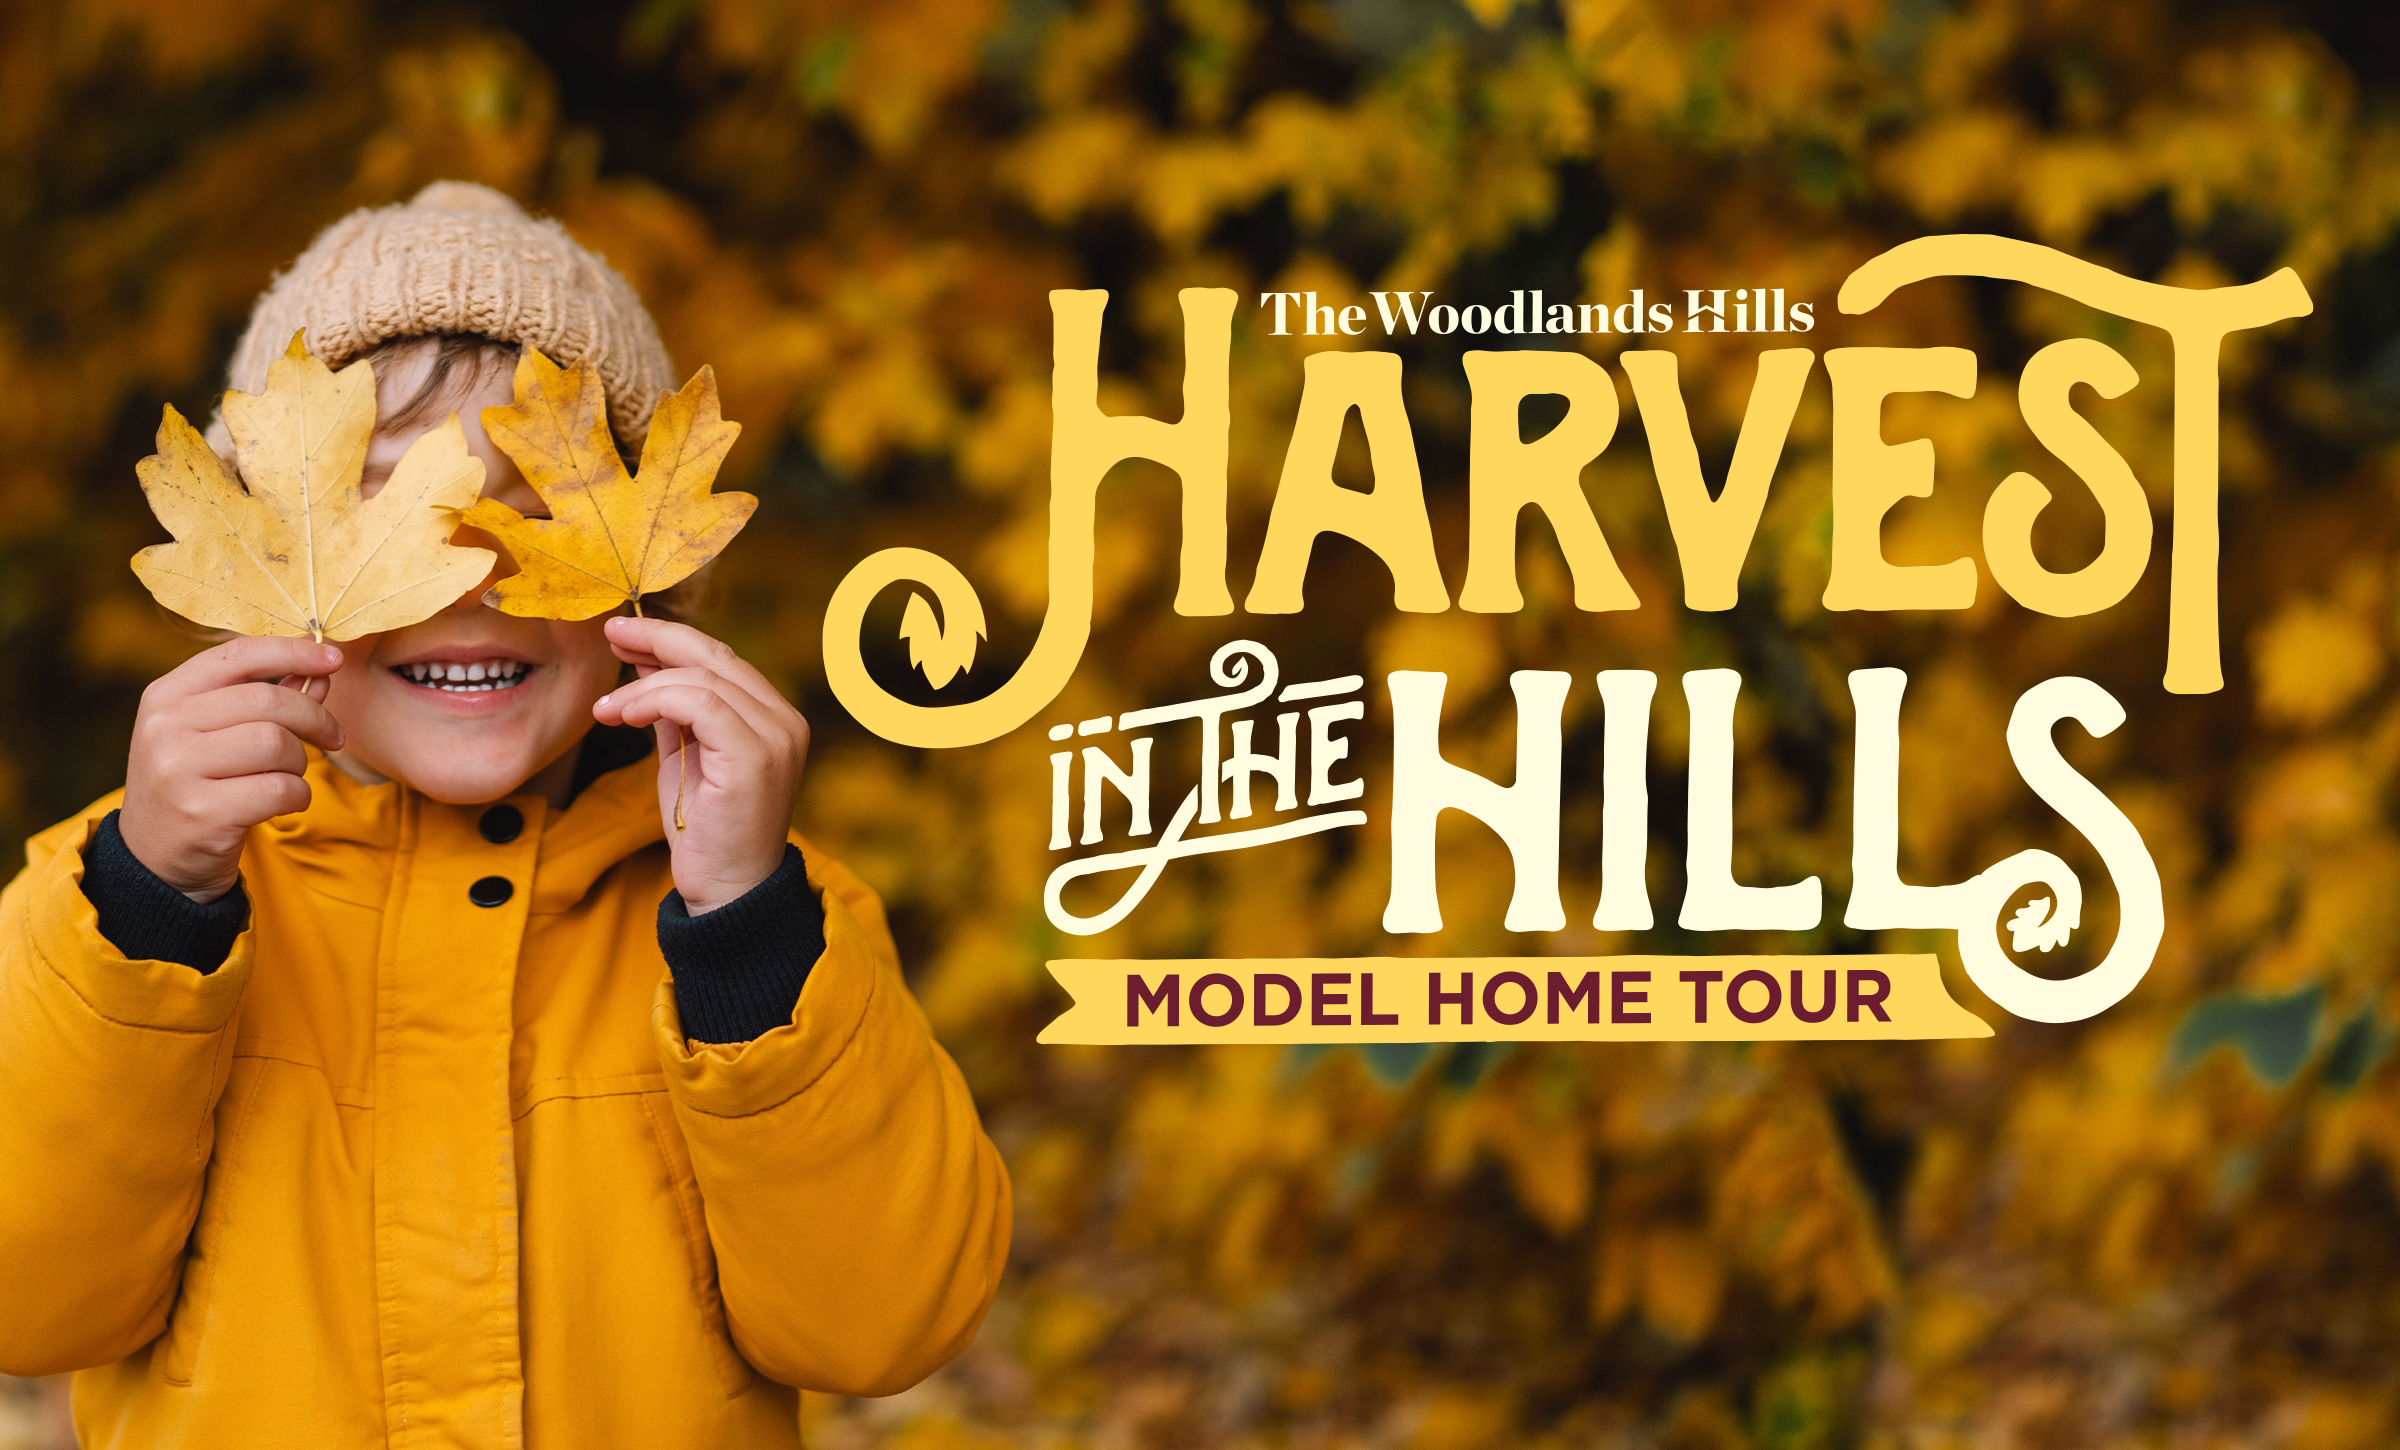 The Woodlands Hills to Host 3rd Annual “Harvest In The Hills” Model Home Tour & Fall Festival on Saturday, November 6